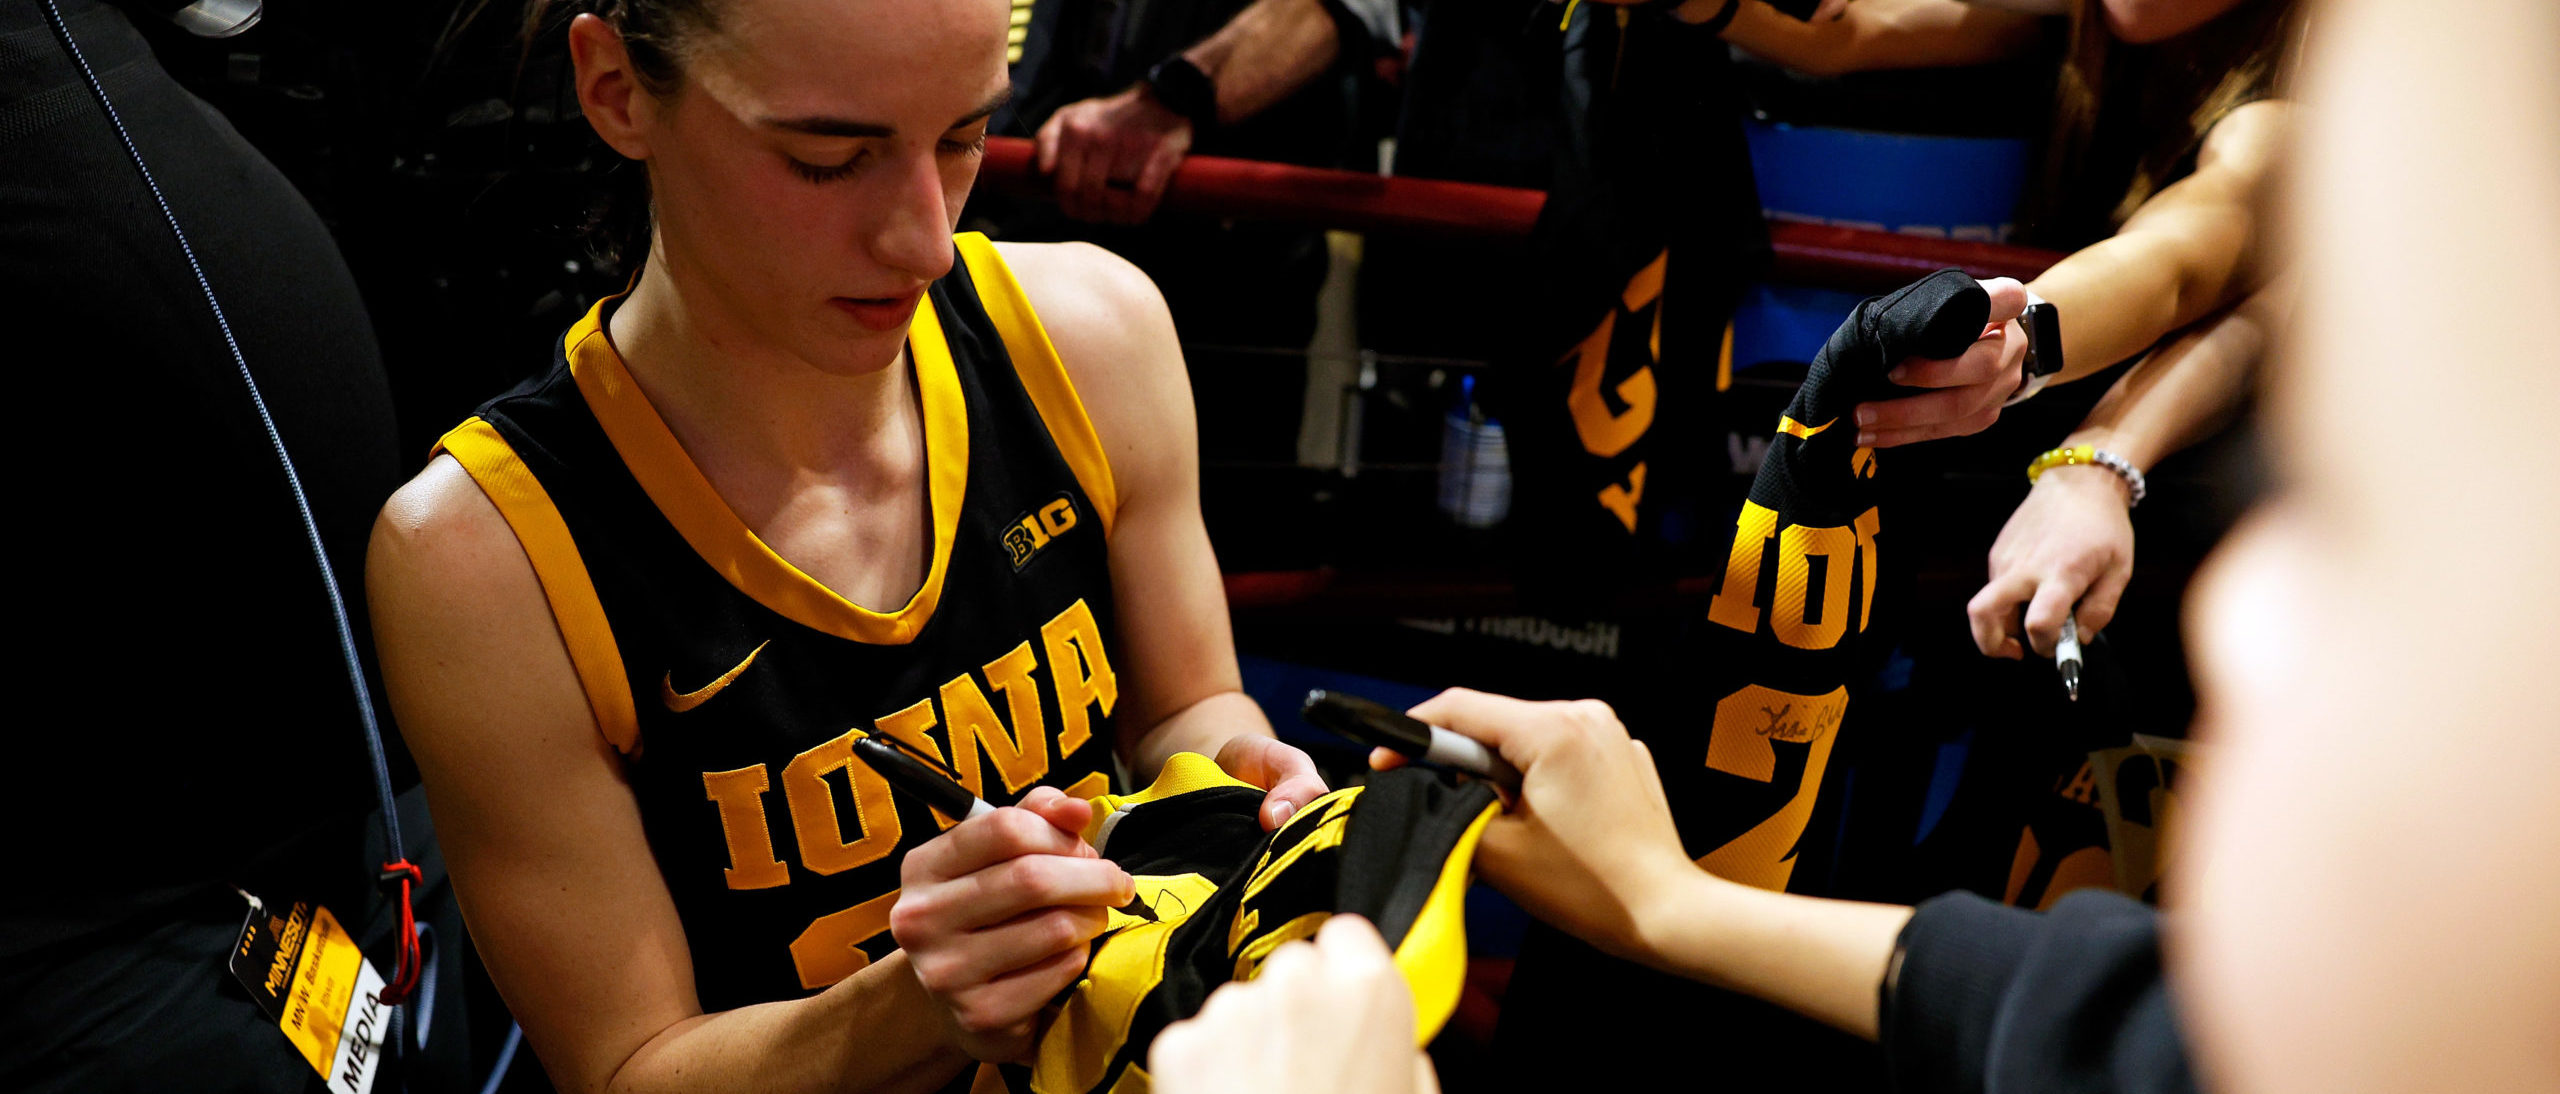 Caitlin Clark #22 of the Iowa Hawkeyes signs autographs for fans after the game against the Minnesota Golden Gophers at Williams Arena on February 28, 2024 in Minneapolis, Minnesota. The Hawkeyes defeated the Golden Gophers 108-60. (Photo by David Berding/Getty Images)